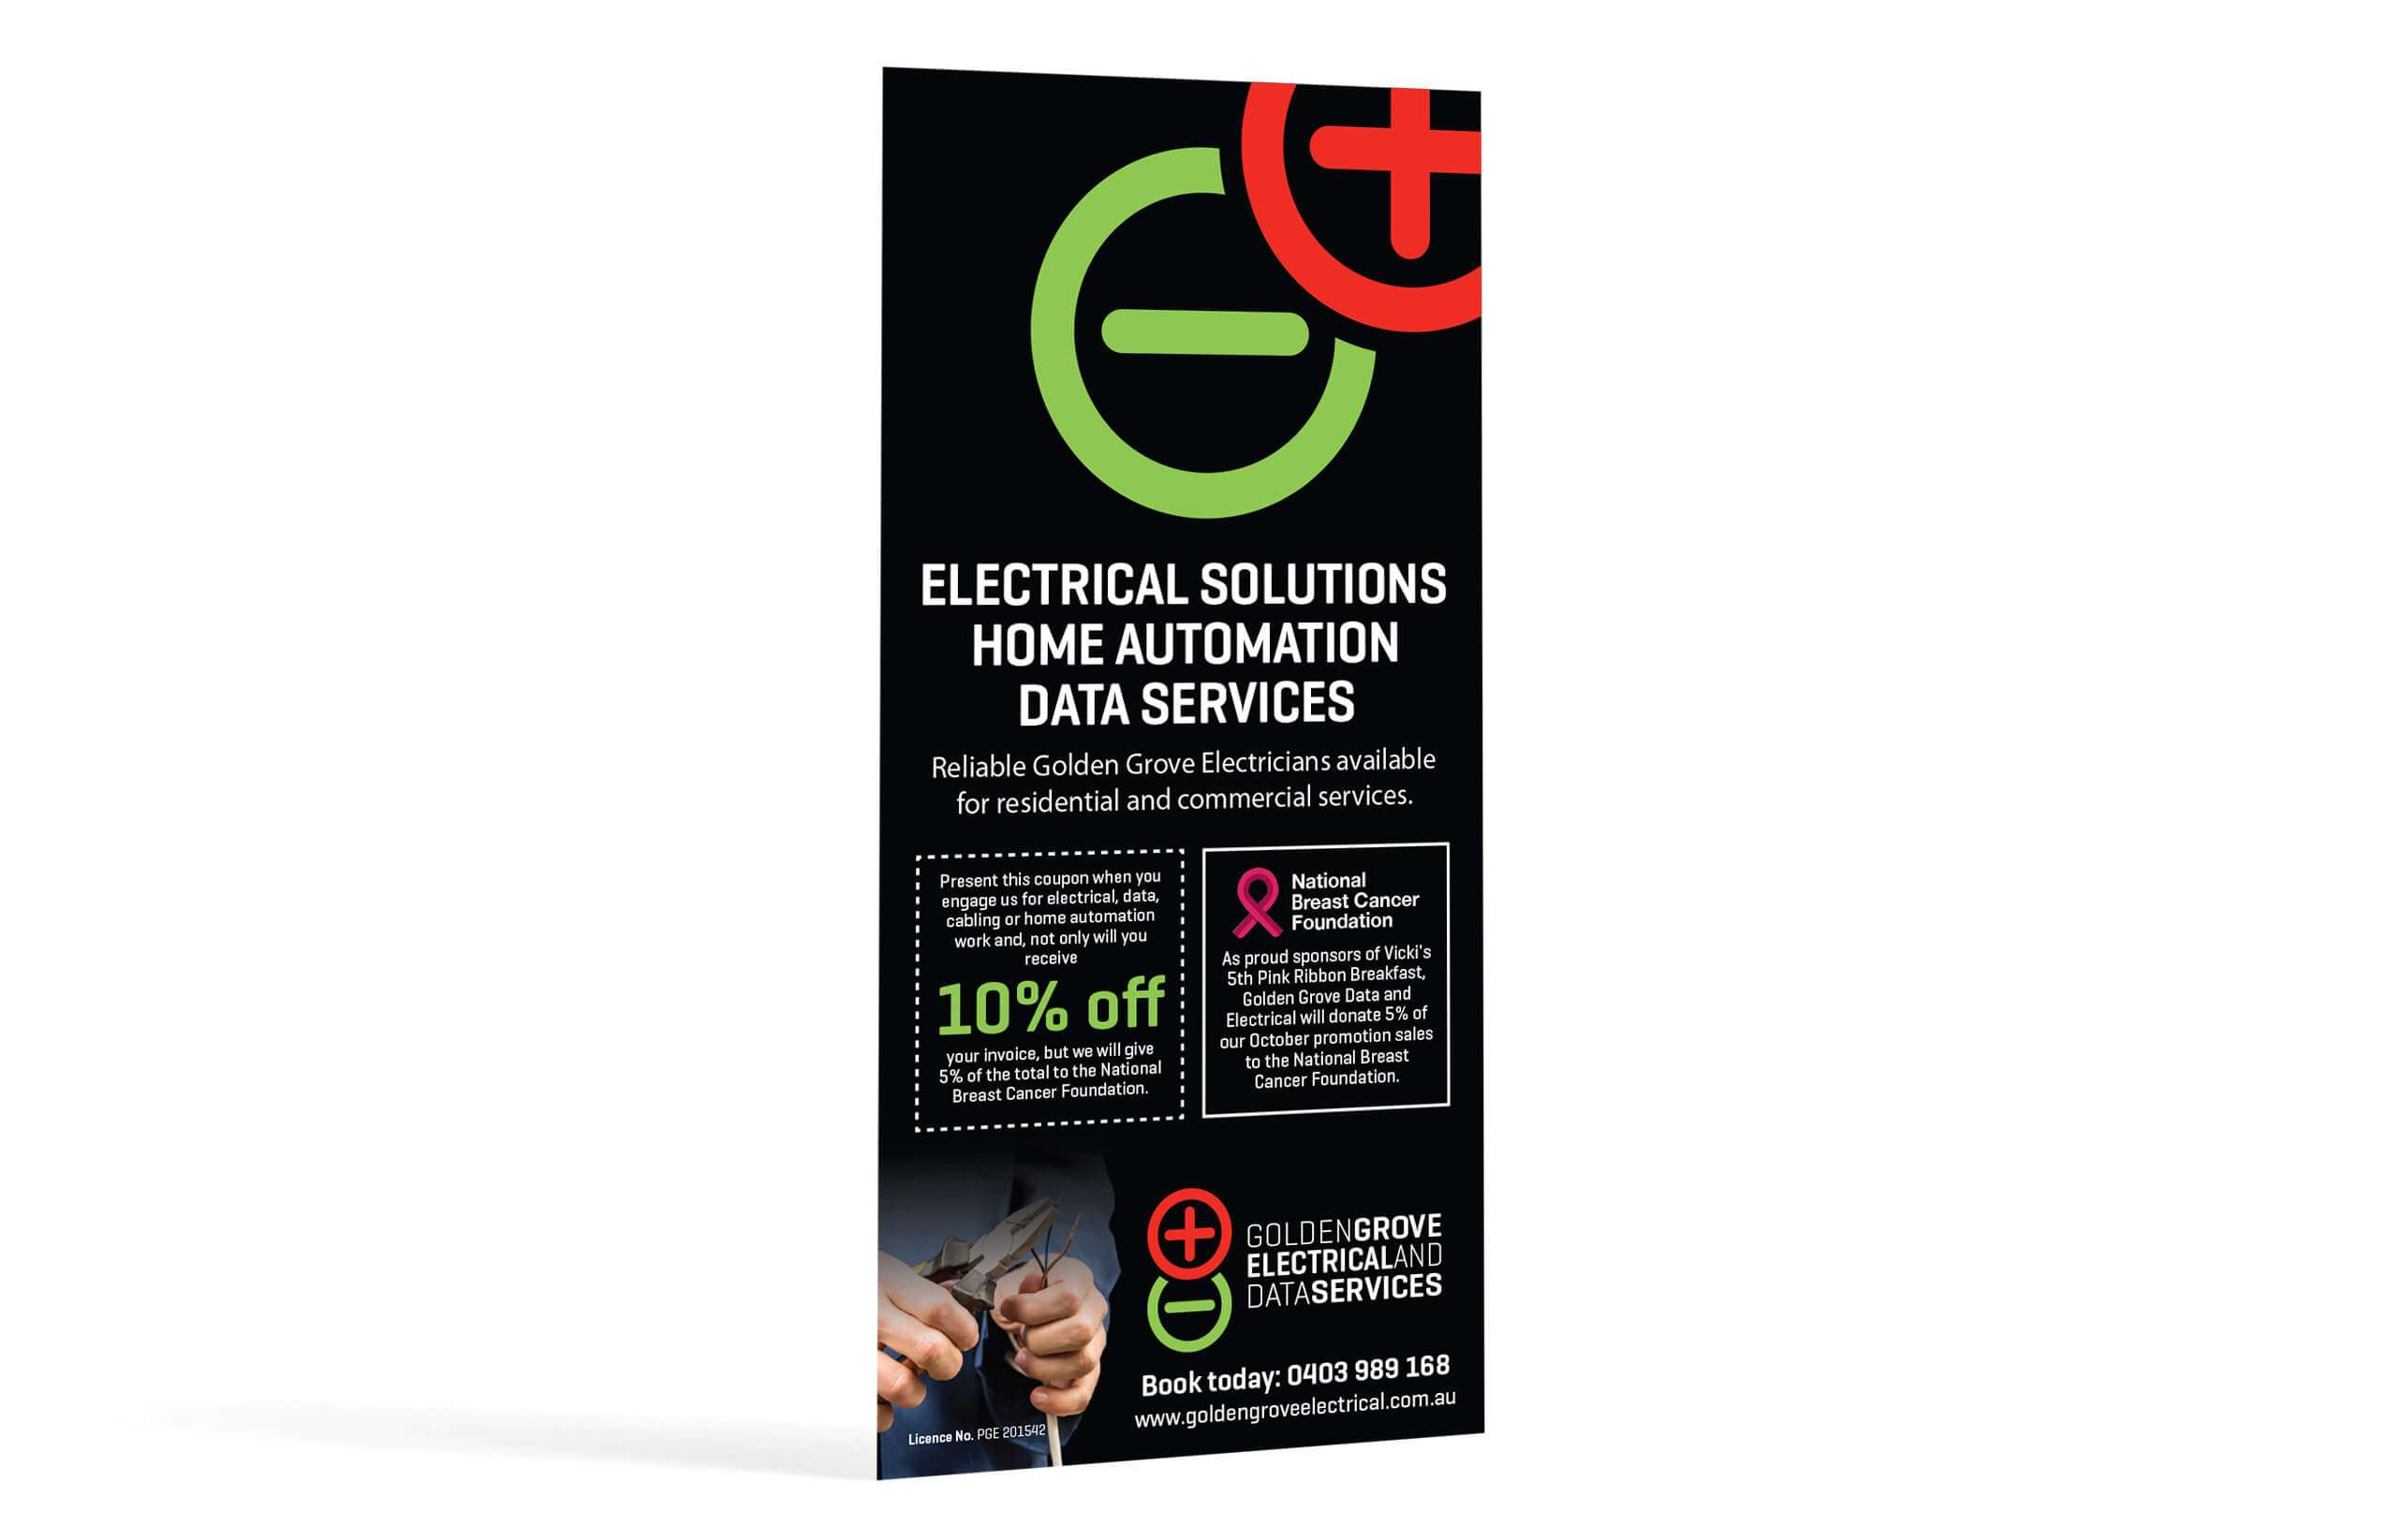 Icon Web Design Adelaide. Image of the Golden Grove Electrical & Data Services flyer standing vertically.